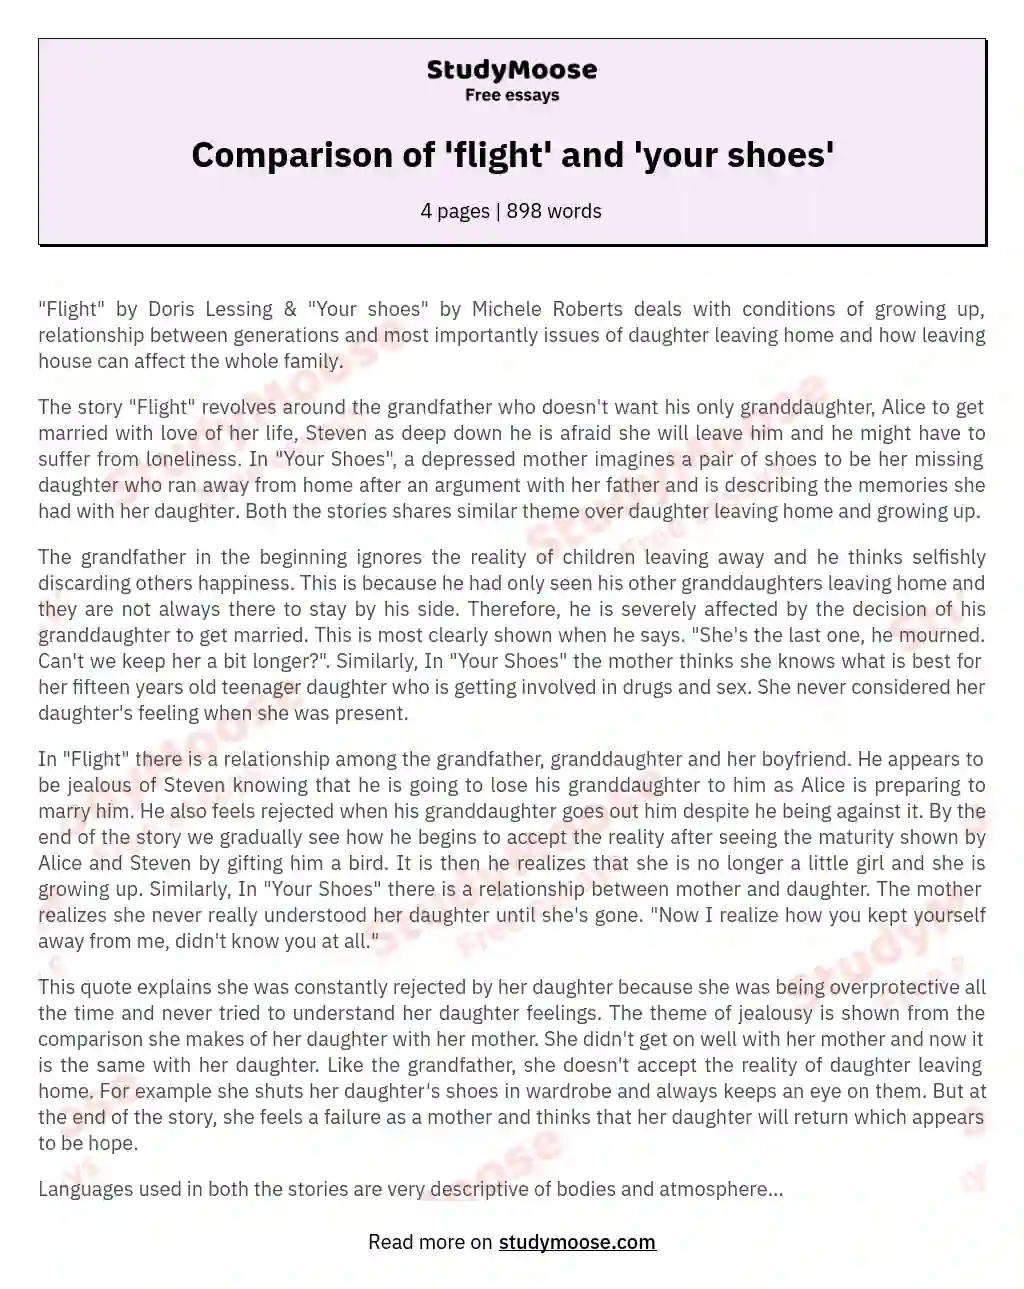 Comparison of 'flight' and 'your shoes'